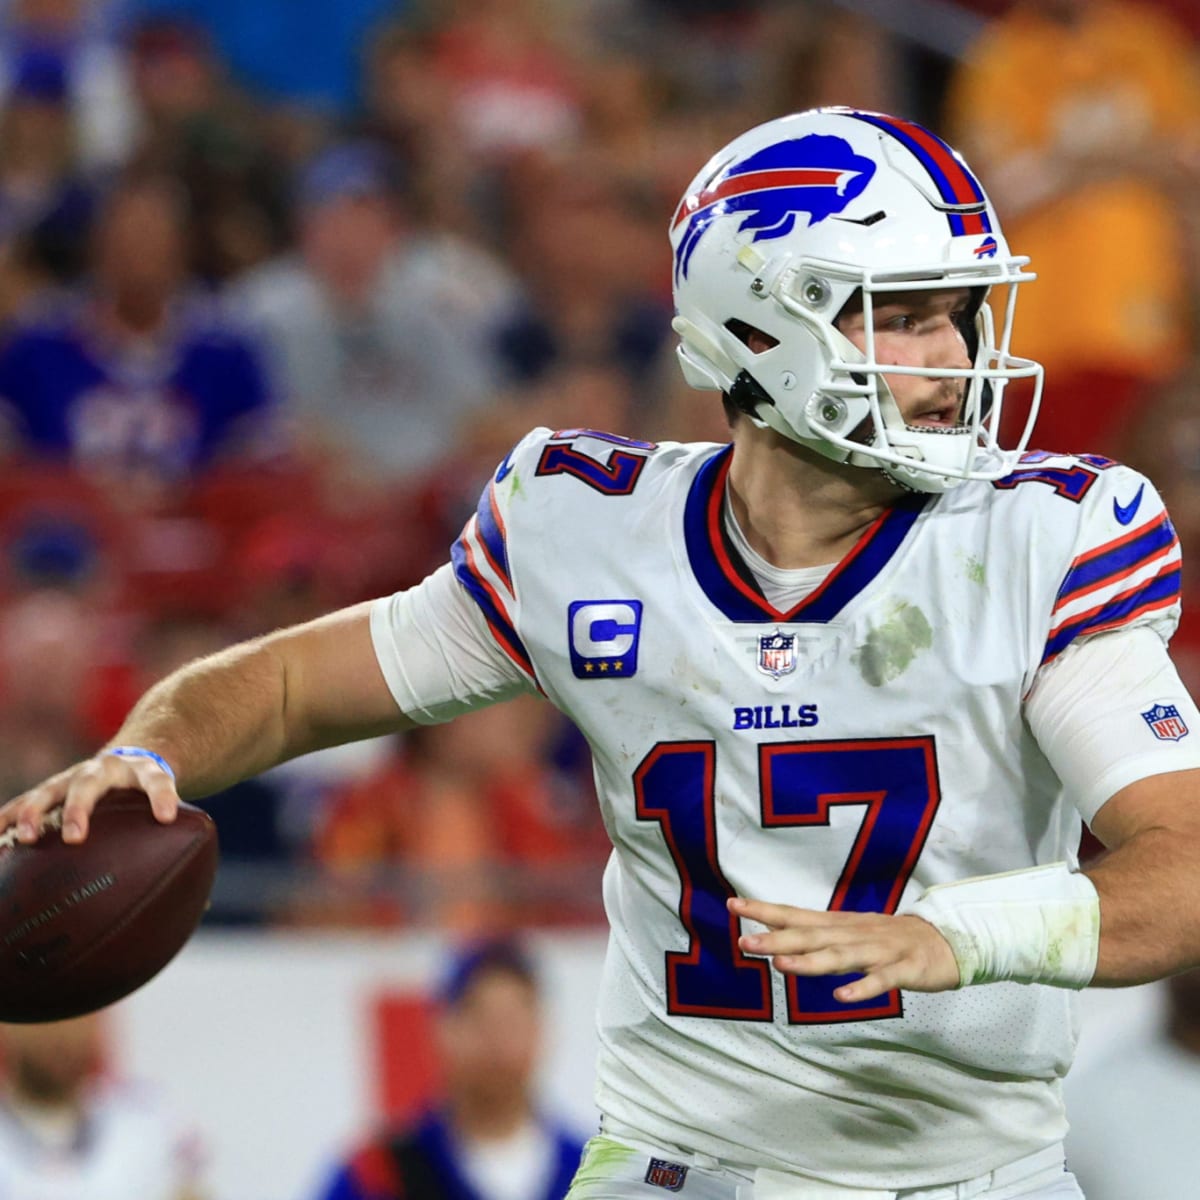 NFL Fans Impressed By Josh Allen's Performance On Sunday - The